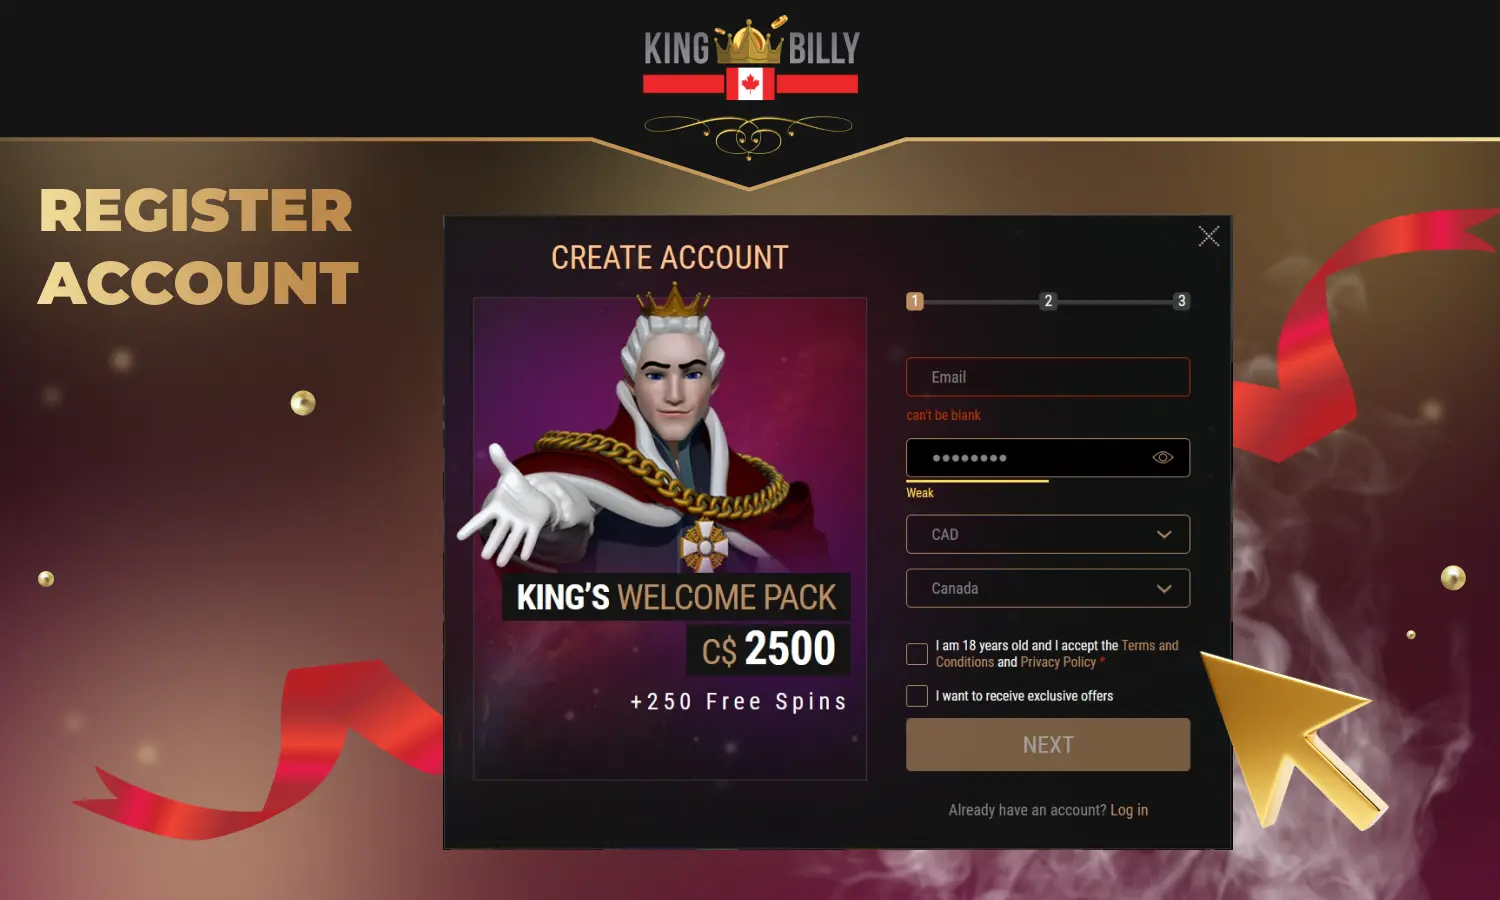 Registering an account with King Billy gives users from Canada full access to all the features and functionality of the casino platform